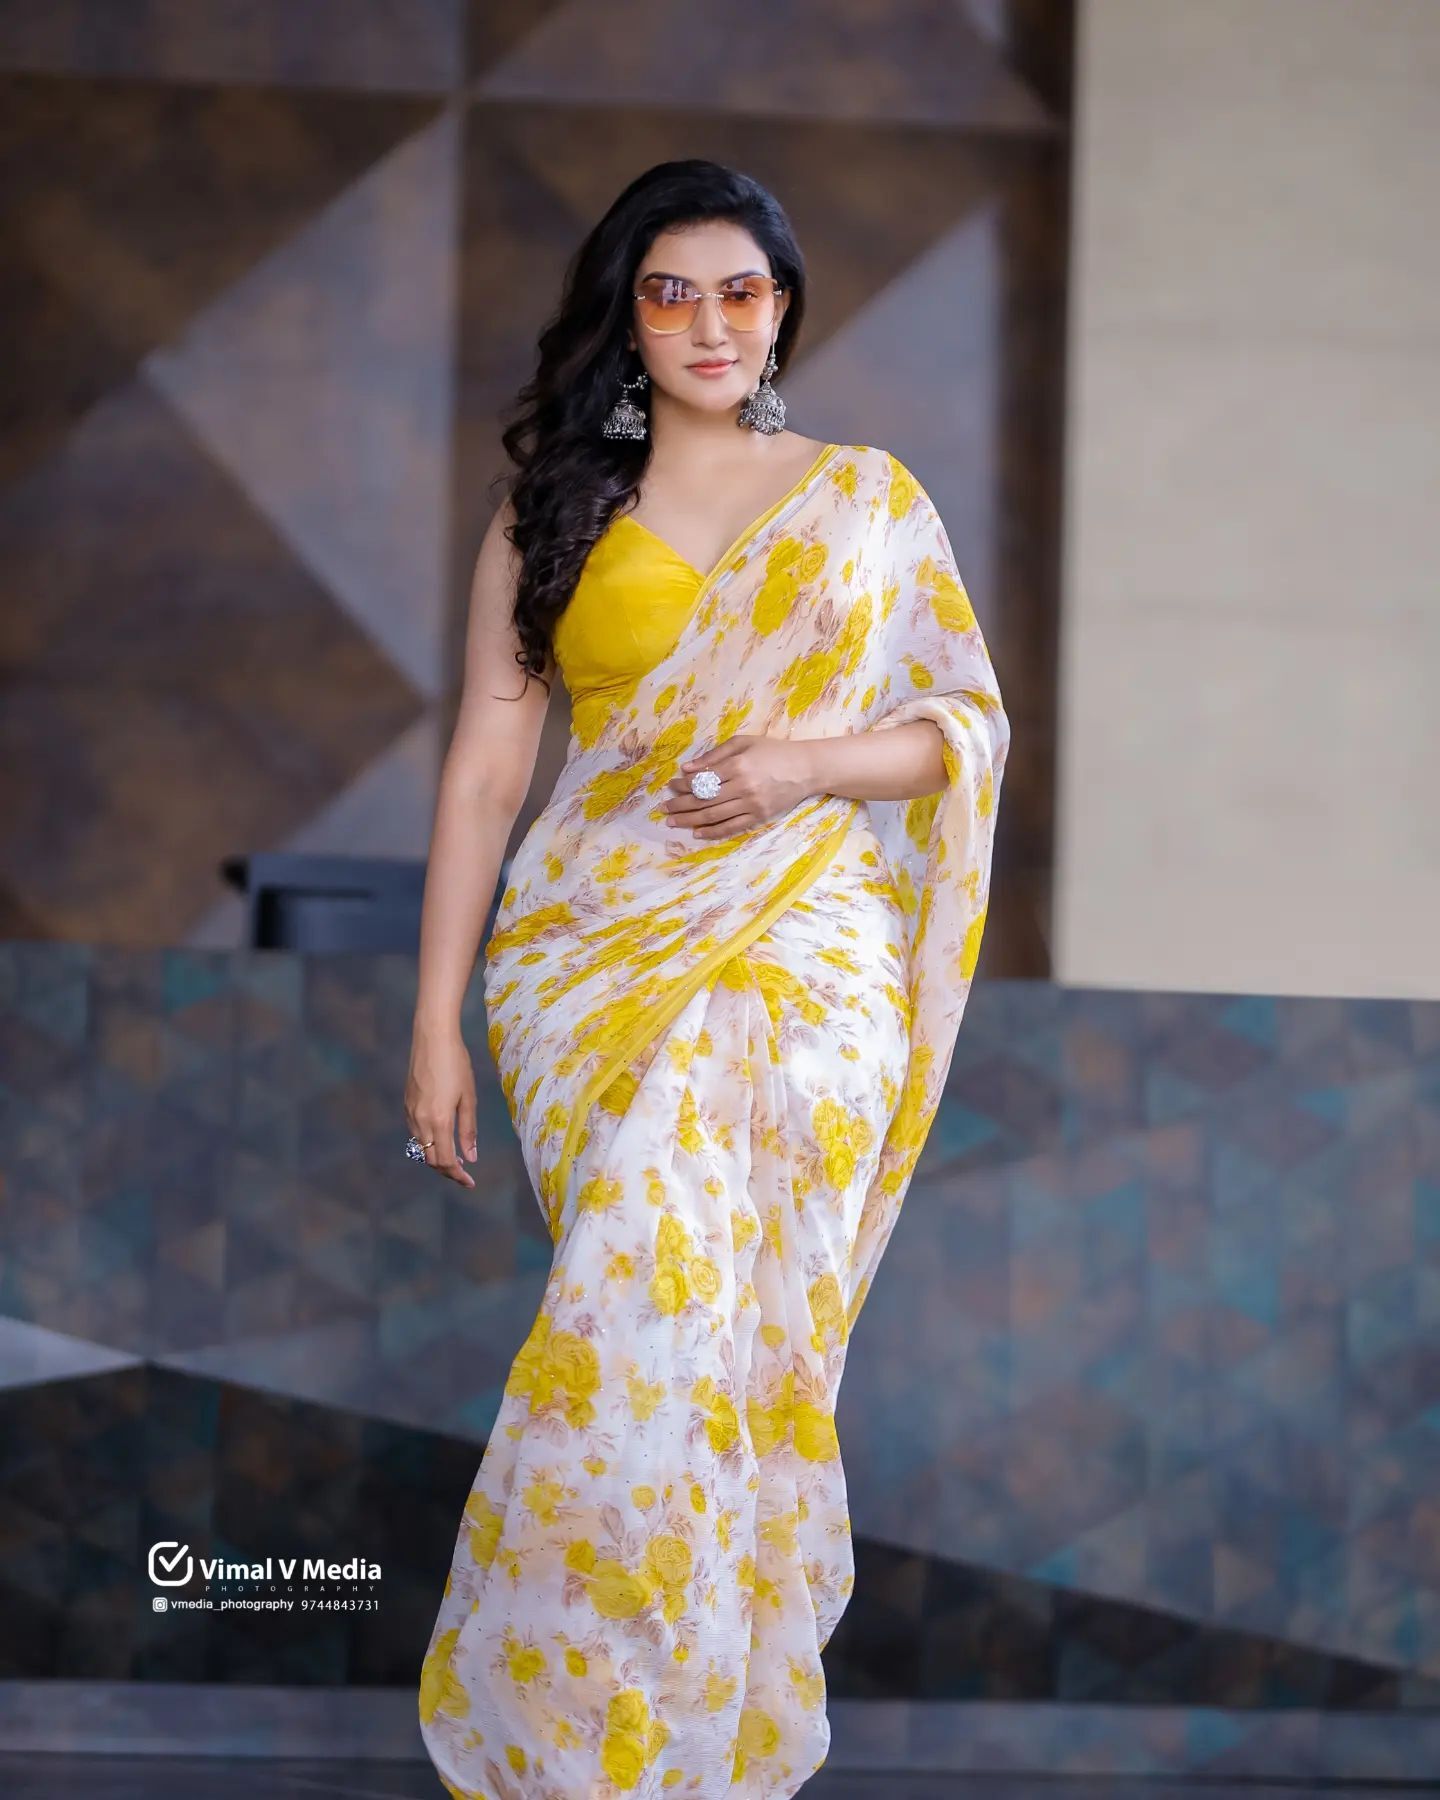 Honey Rose In Yellow & White Floral Print Saree In Yellow Sleeveless Blouse